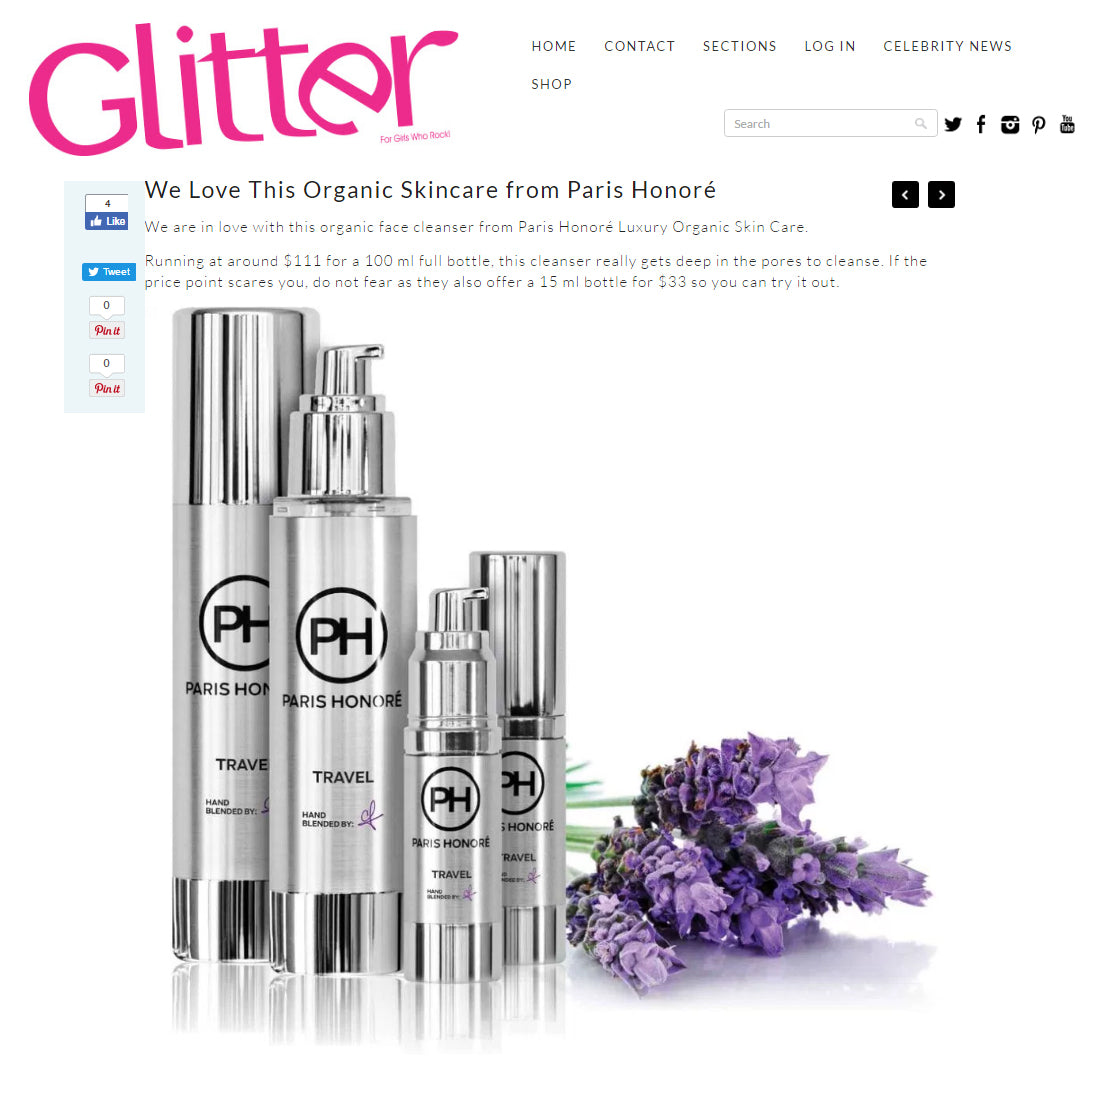 Glitter Magazine is in love with Paris Honoré's Organic Skin Care